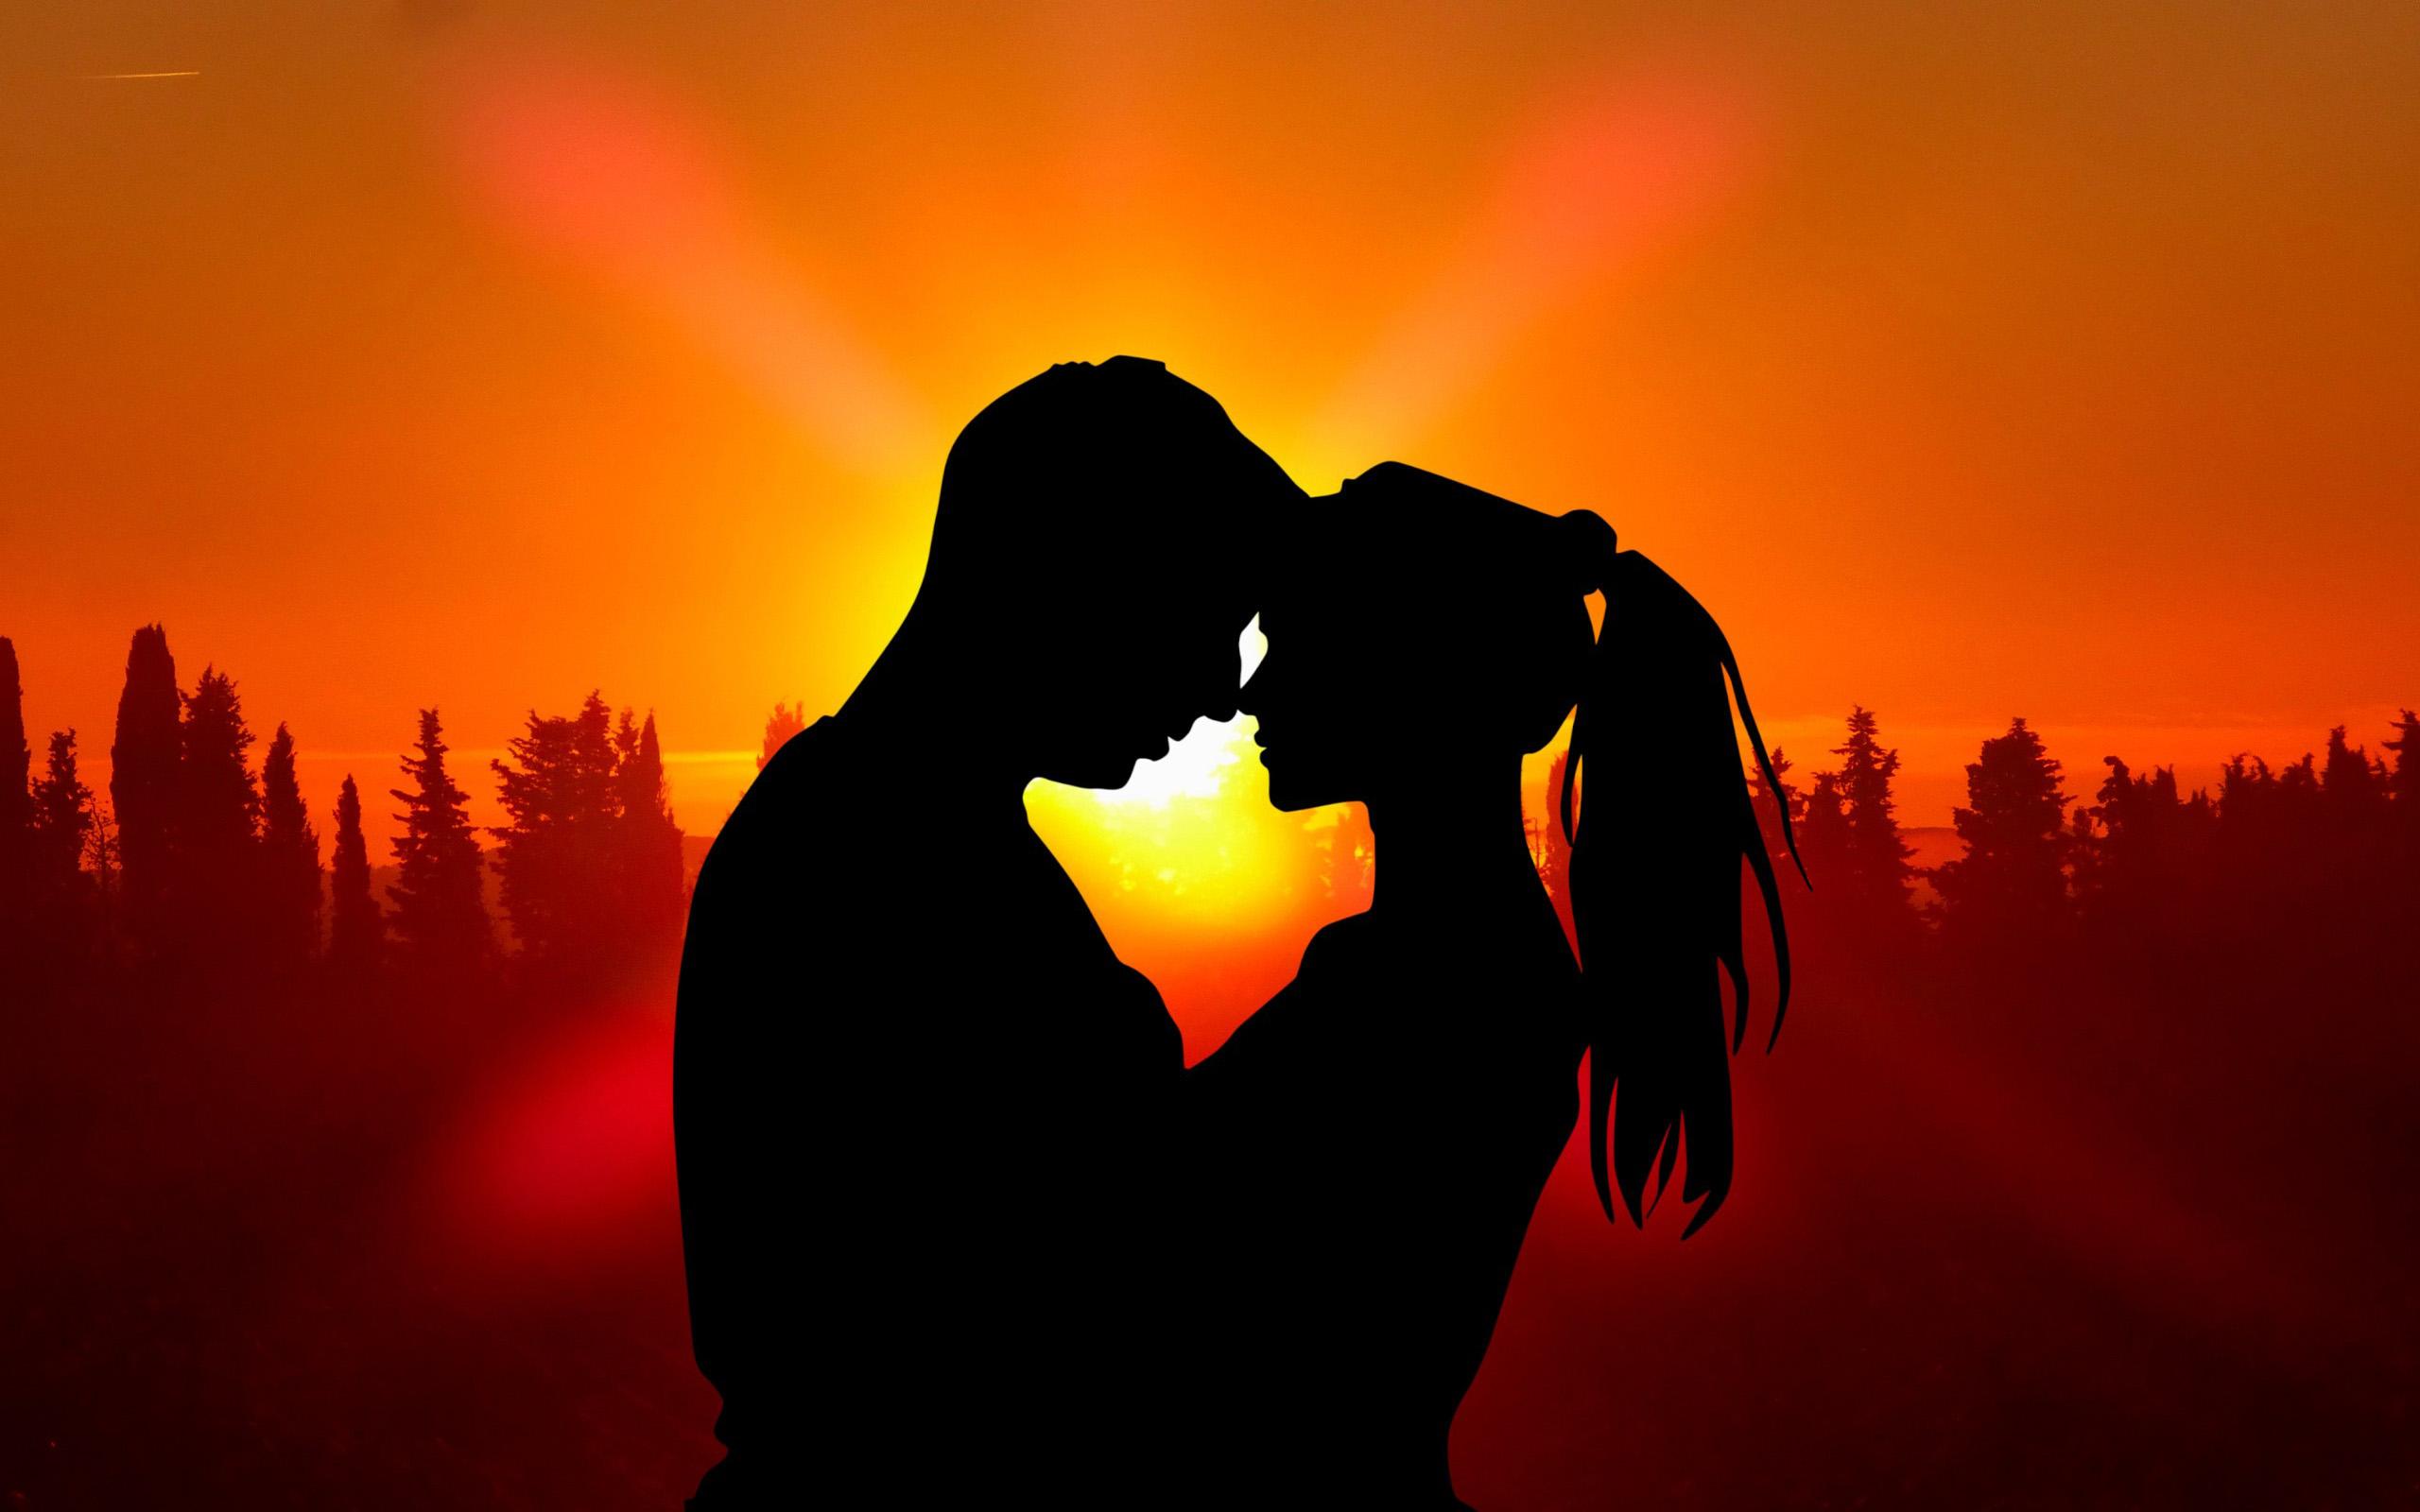 Sunset Boy and Girl Silhouette romantic couple love Wallpaper HD for mobile phones, Wallpaper13.com